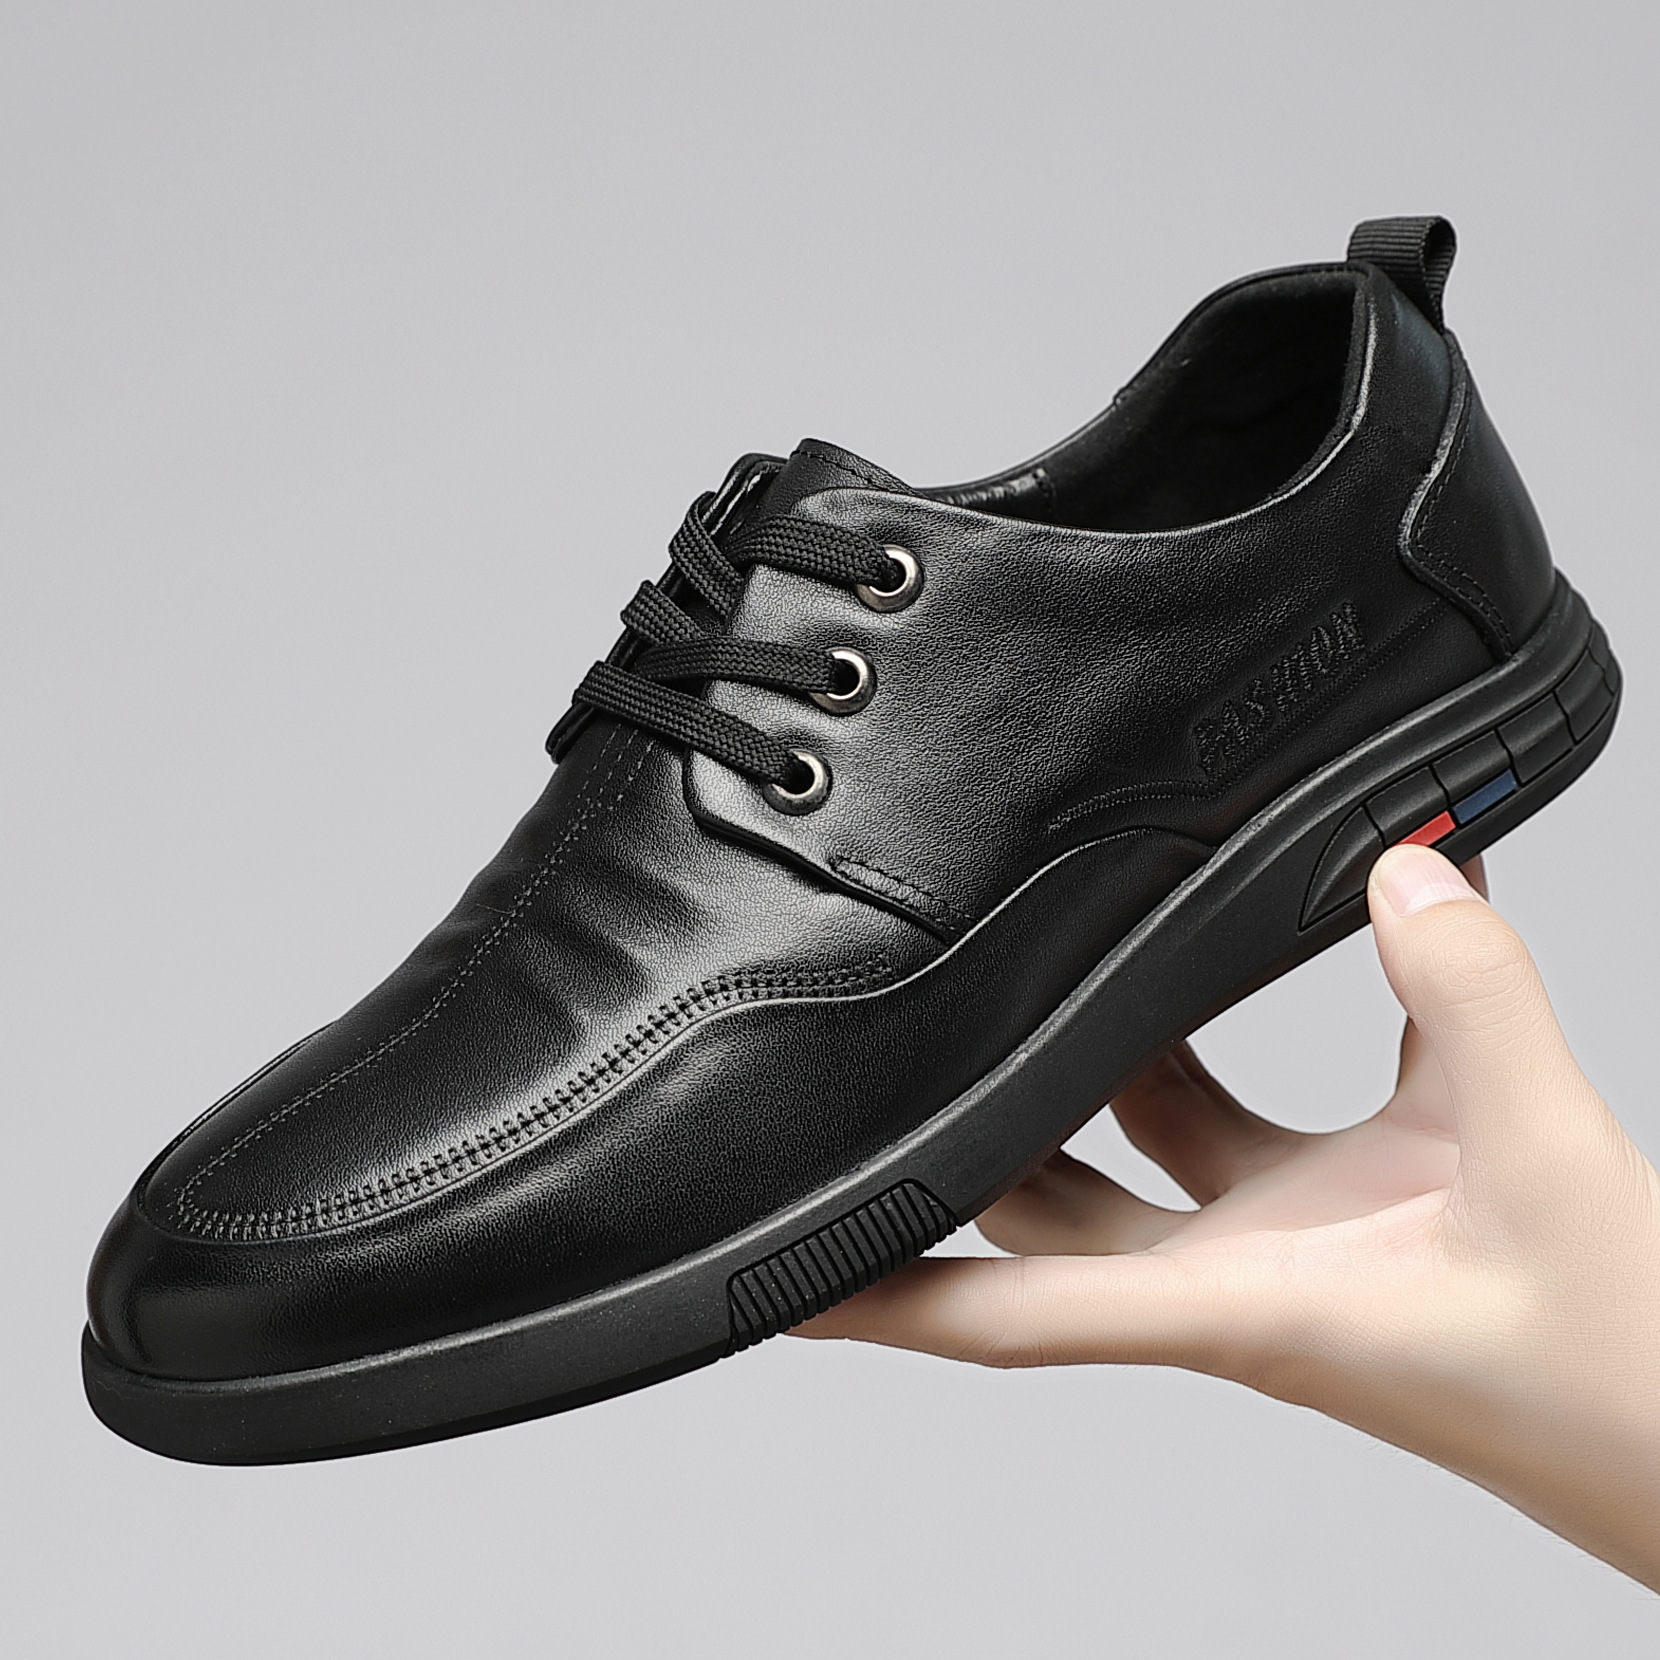 2023 Summer New First Layer Cowhide Men's Casual Leather Shoes Lace up Breathable Wear-Resistant Leather Shoes Factory Wholesale